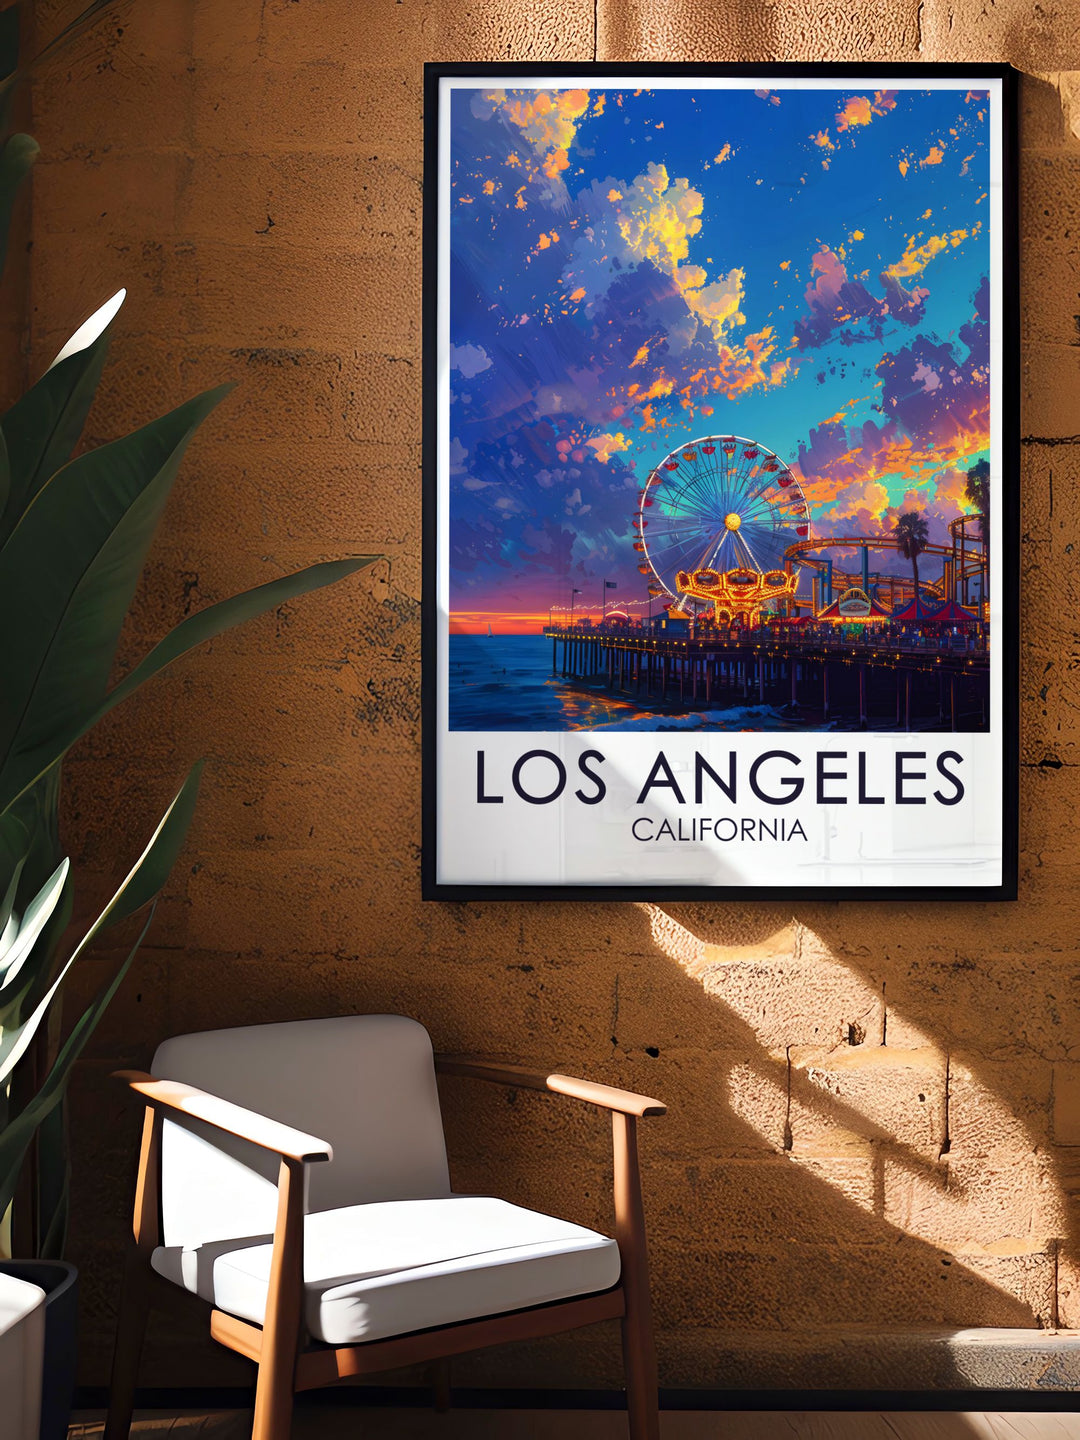 Santa Monica Pier photo print capturing the essence of Los Angeles vibrant culture perfect for enhancing any room with its detailed and colorful imagery an excellent choice for those who appreciate fine art and the beauty of California